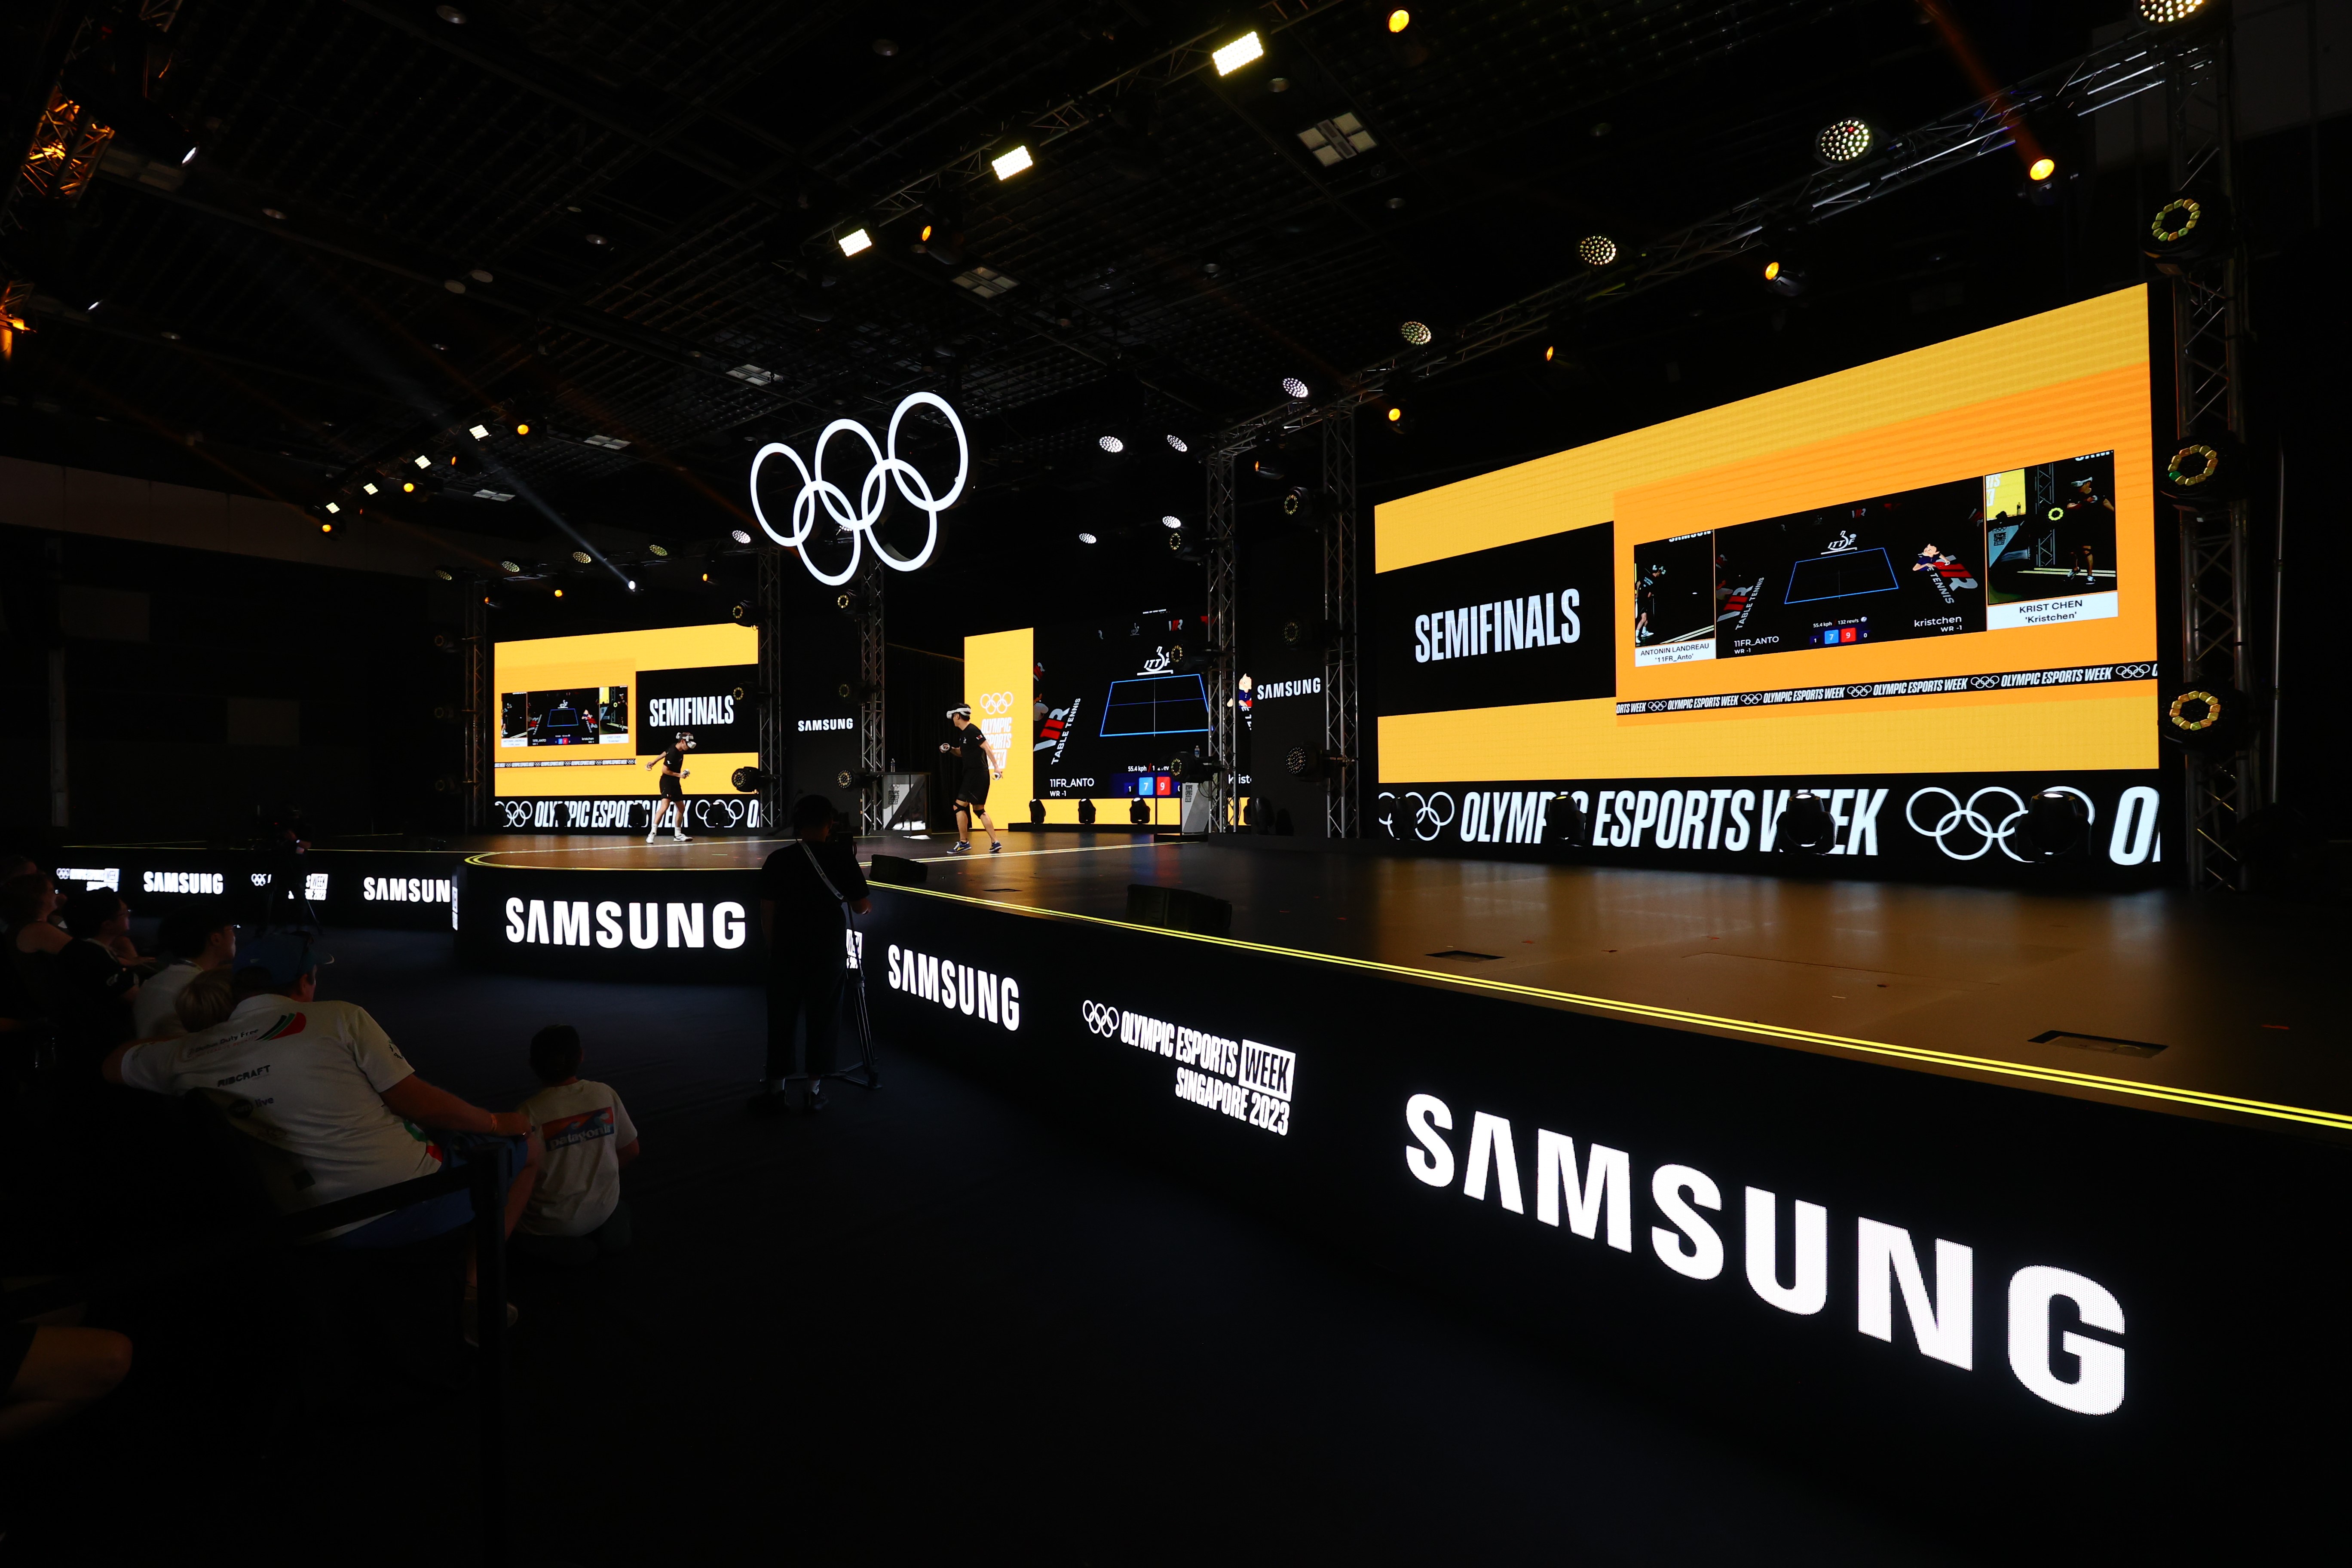 Samsung Odyssey Gaming Monitors were used for main events at the inaugural Olympic Esports Week held in Singapore (Credit: International Olympic Committee)